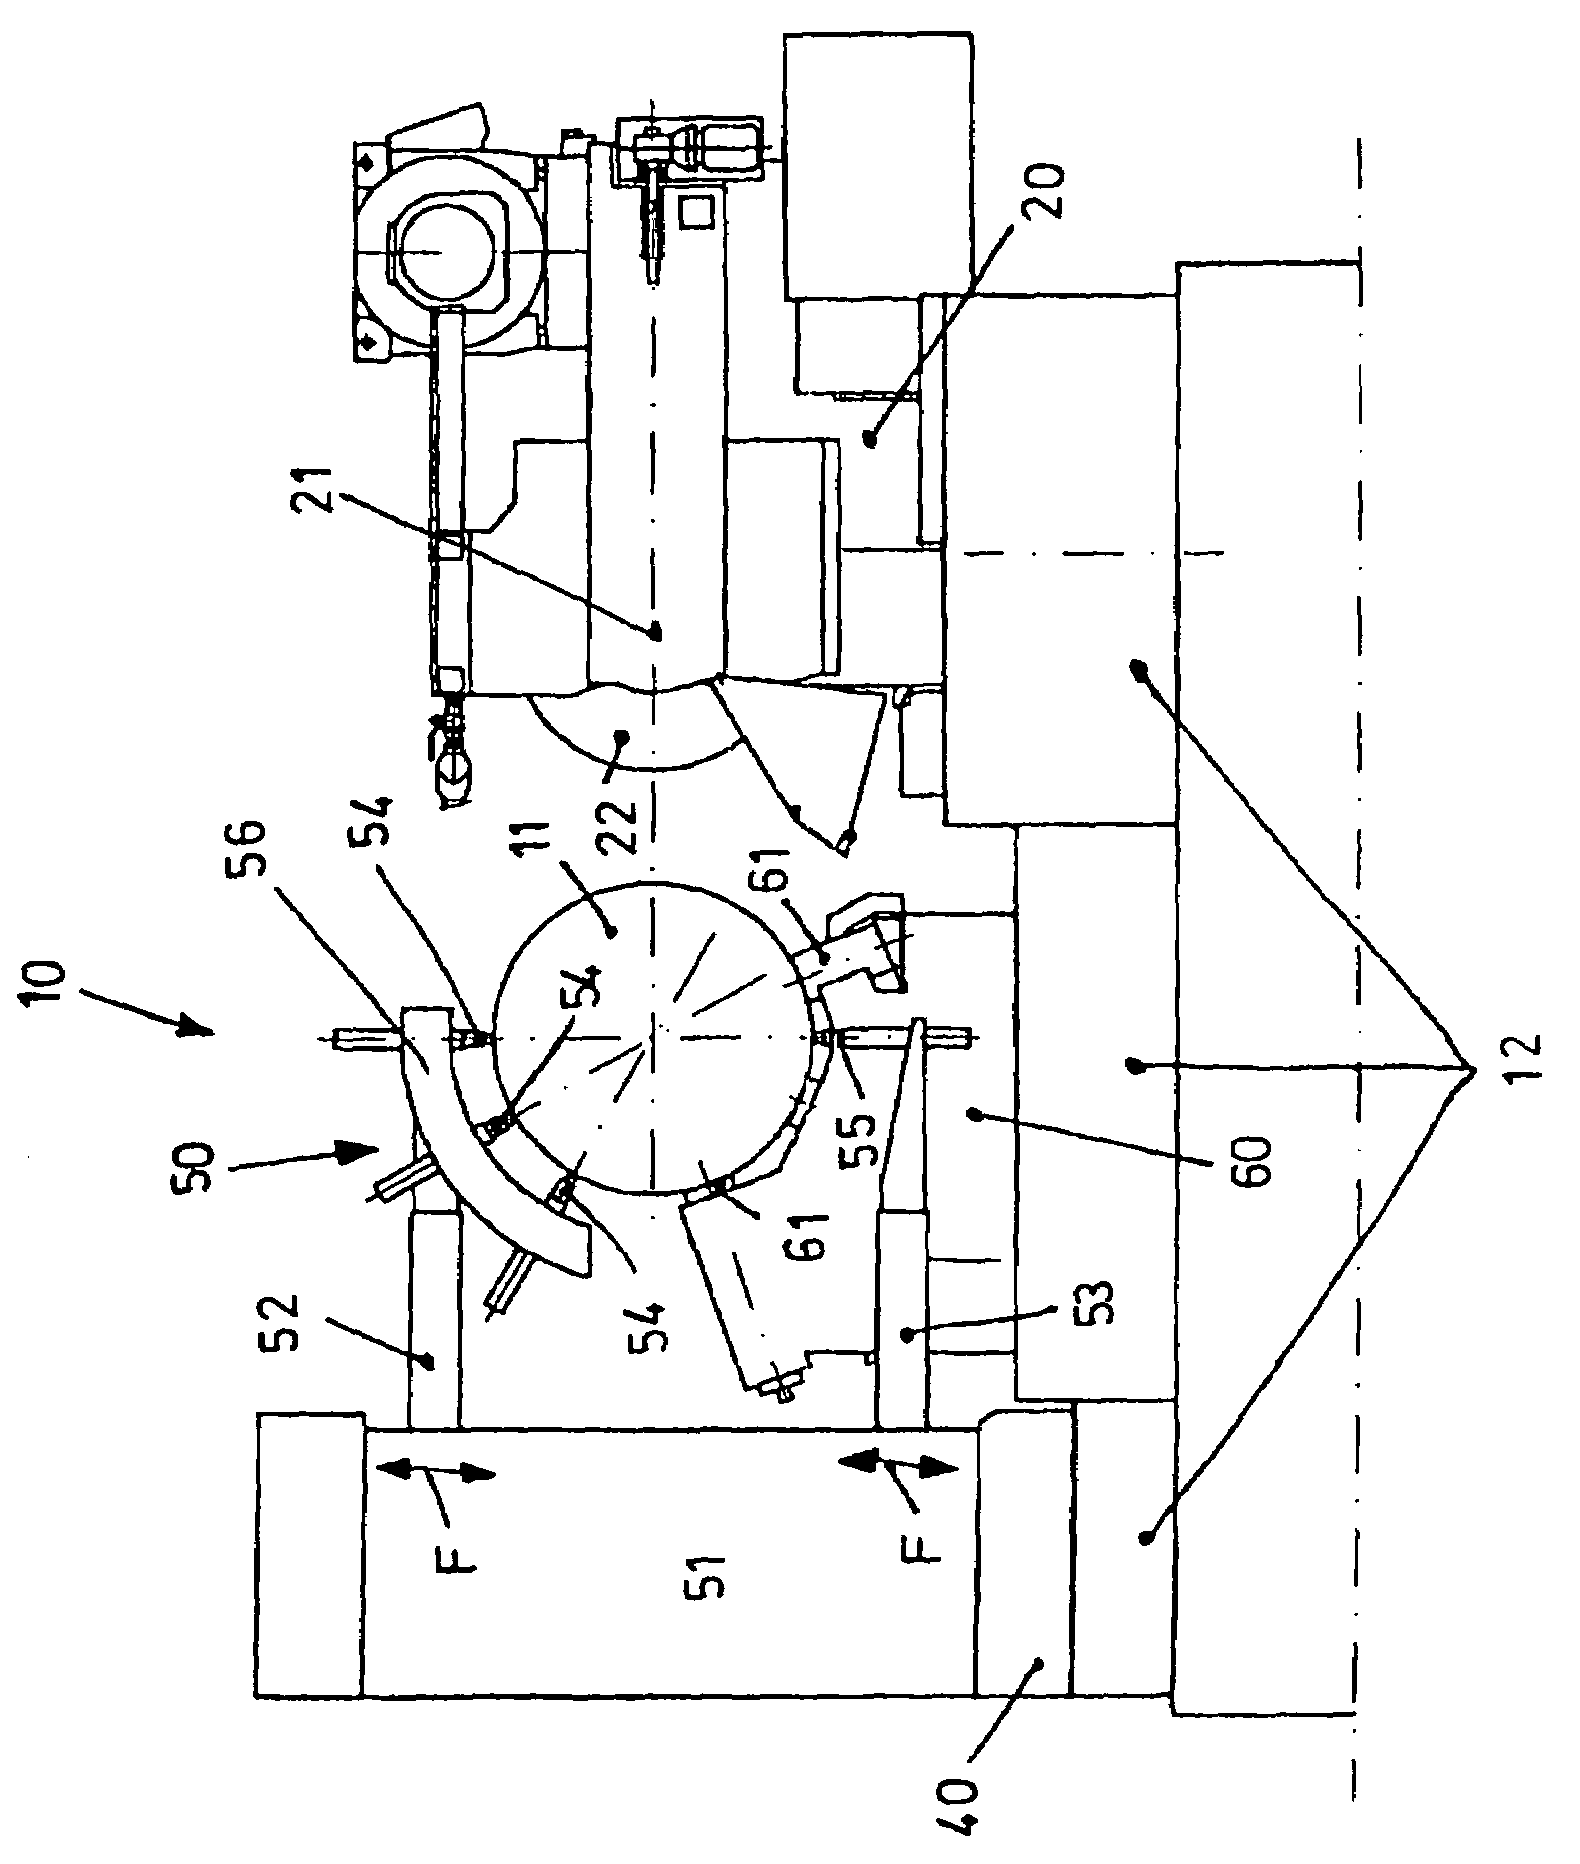 Independent measuring apparatus for grinding machines